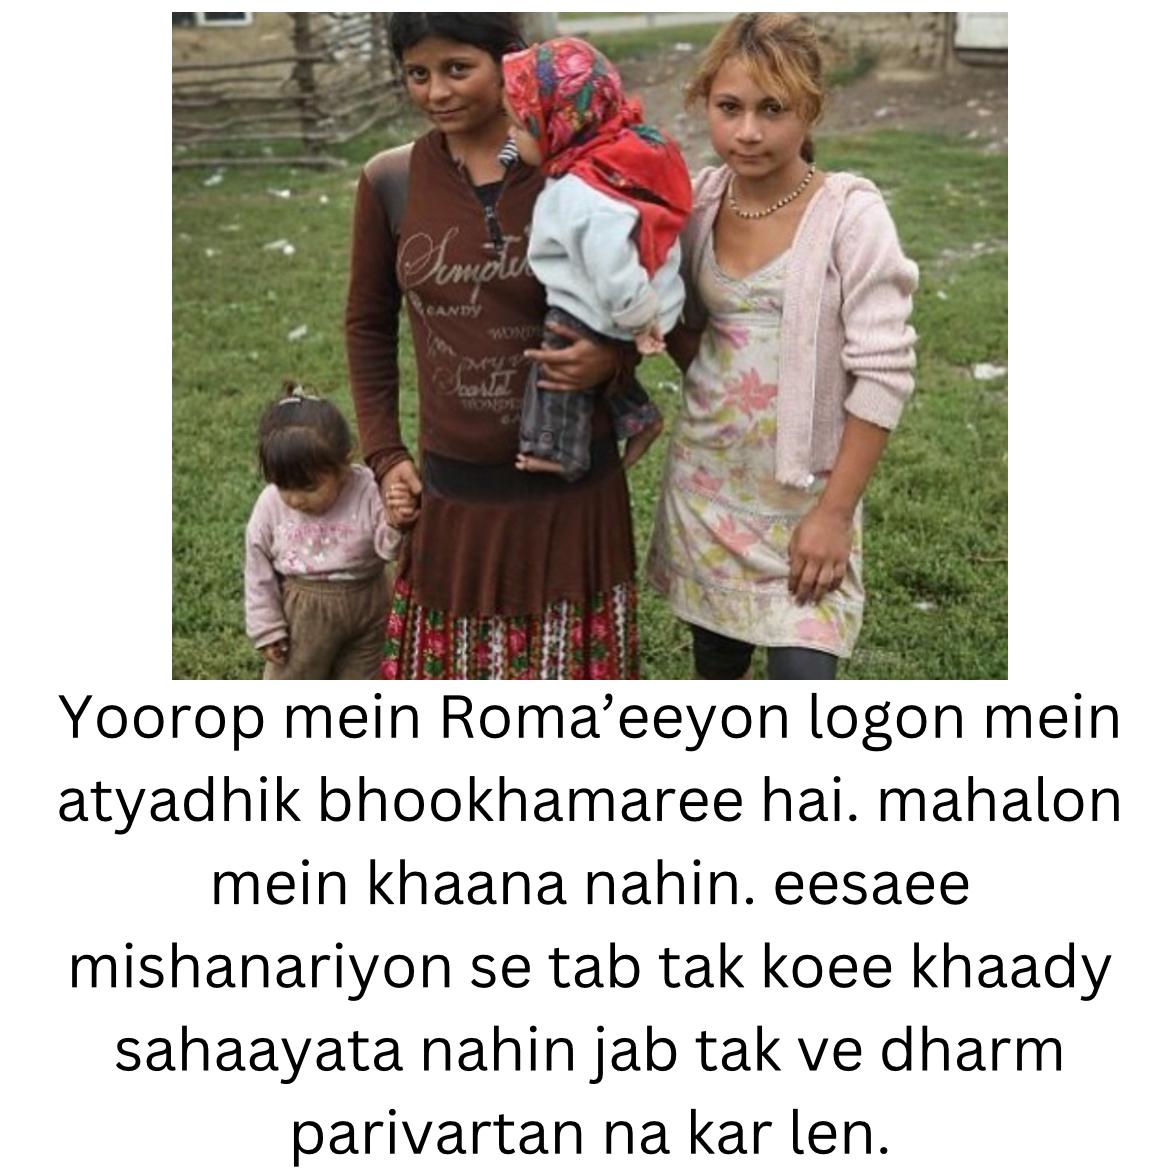 Roma people go back to times of Mahabharat's when I was researching into the background. I want to share what I have found so far. These people are prosecuted or  converted every day! #romanipeople #losthindus